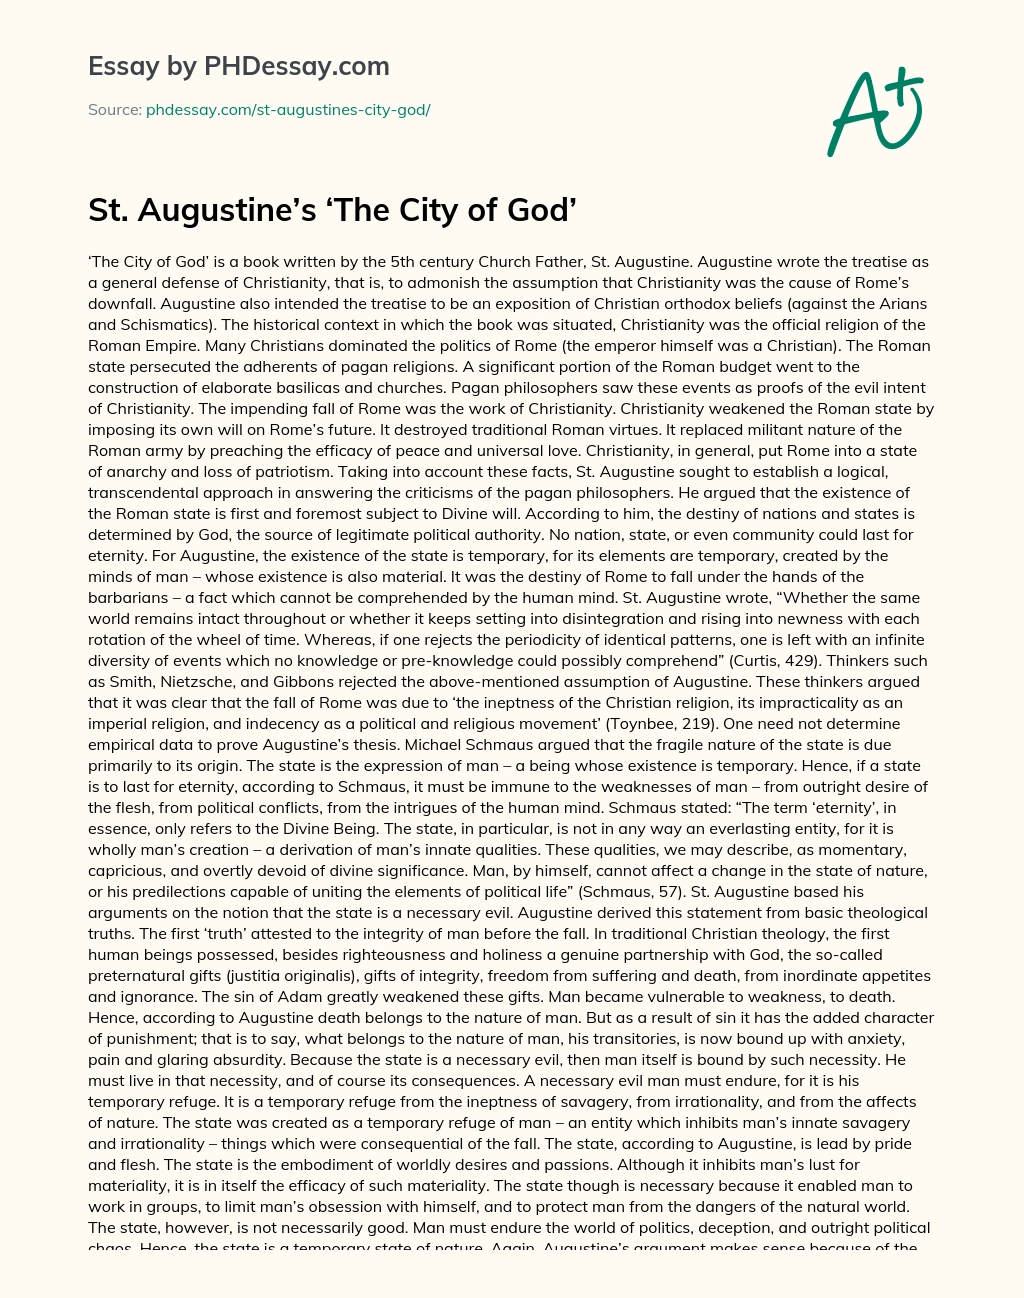 St. Augustine’s ‘The City of God’ essay